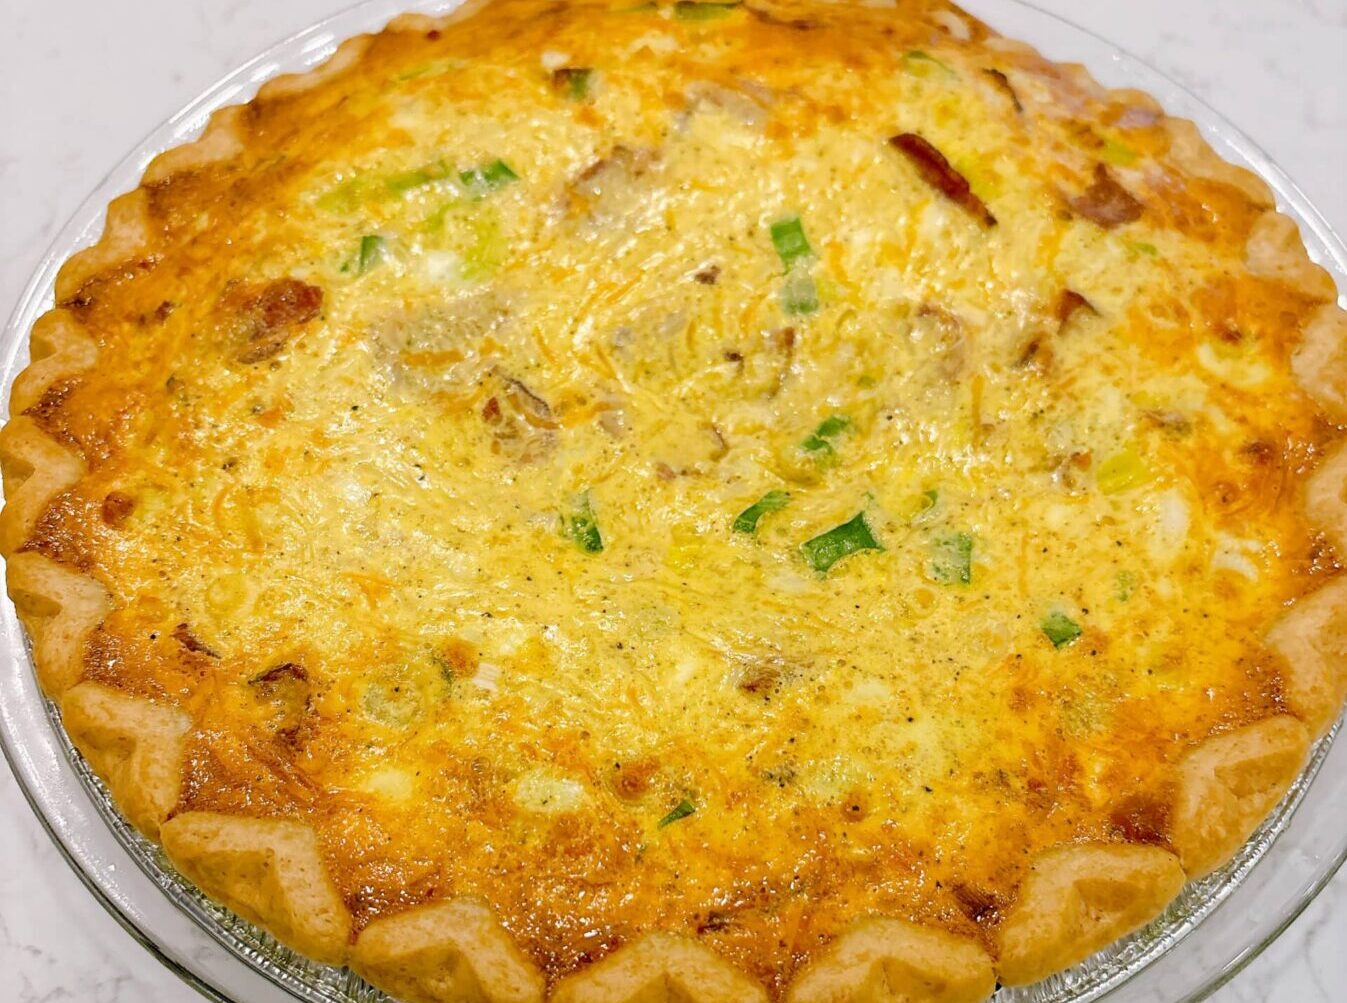 White Cheddar and Bacon Quiche